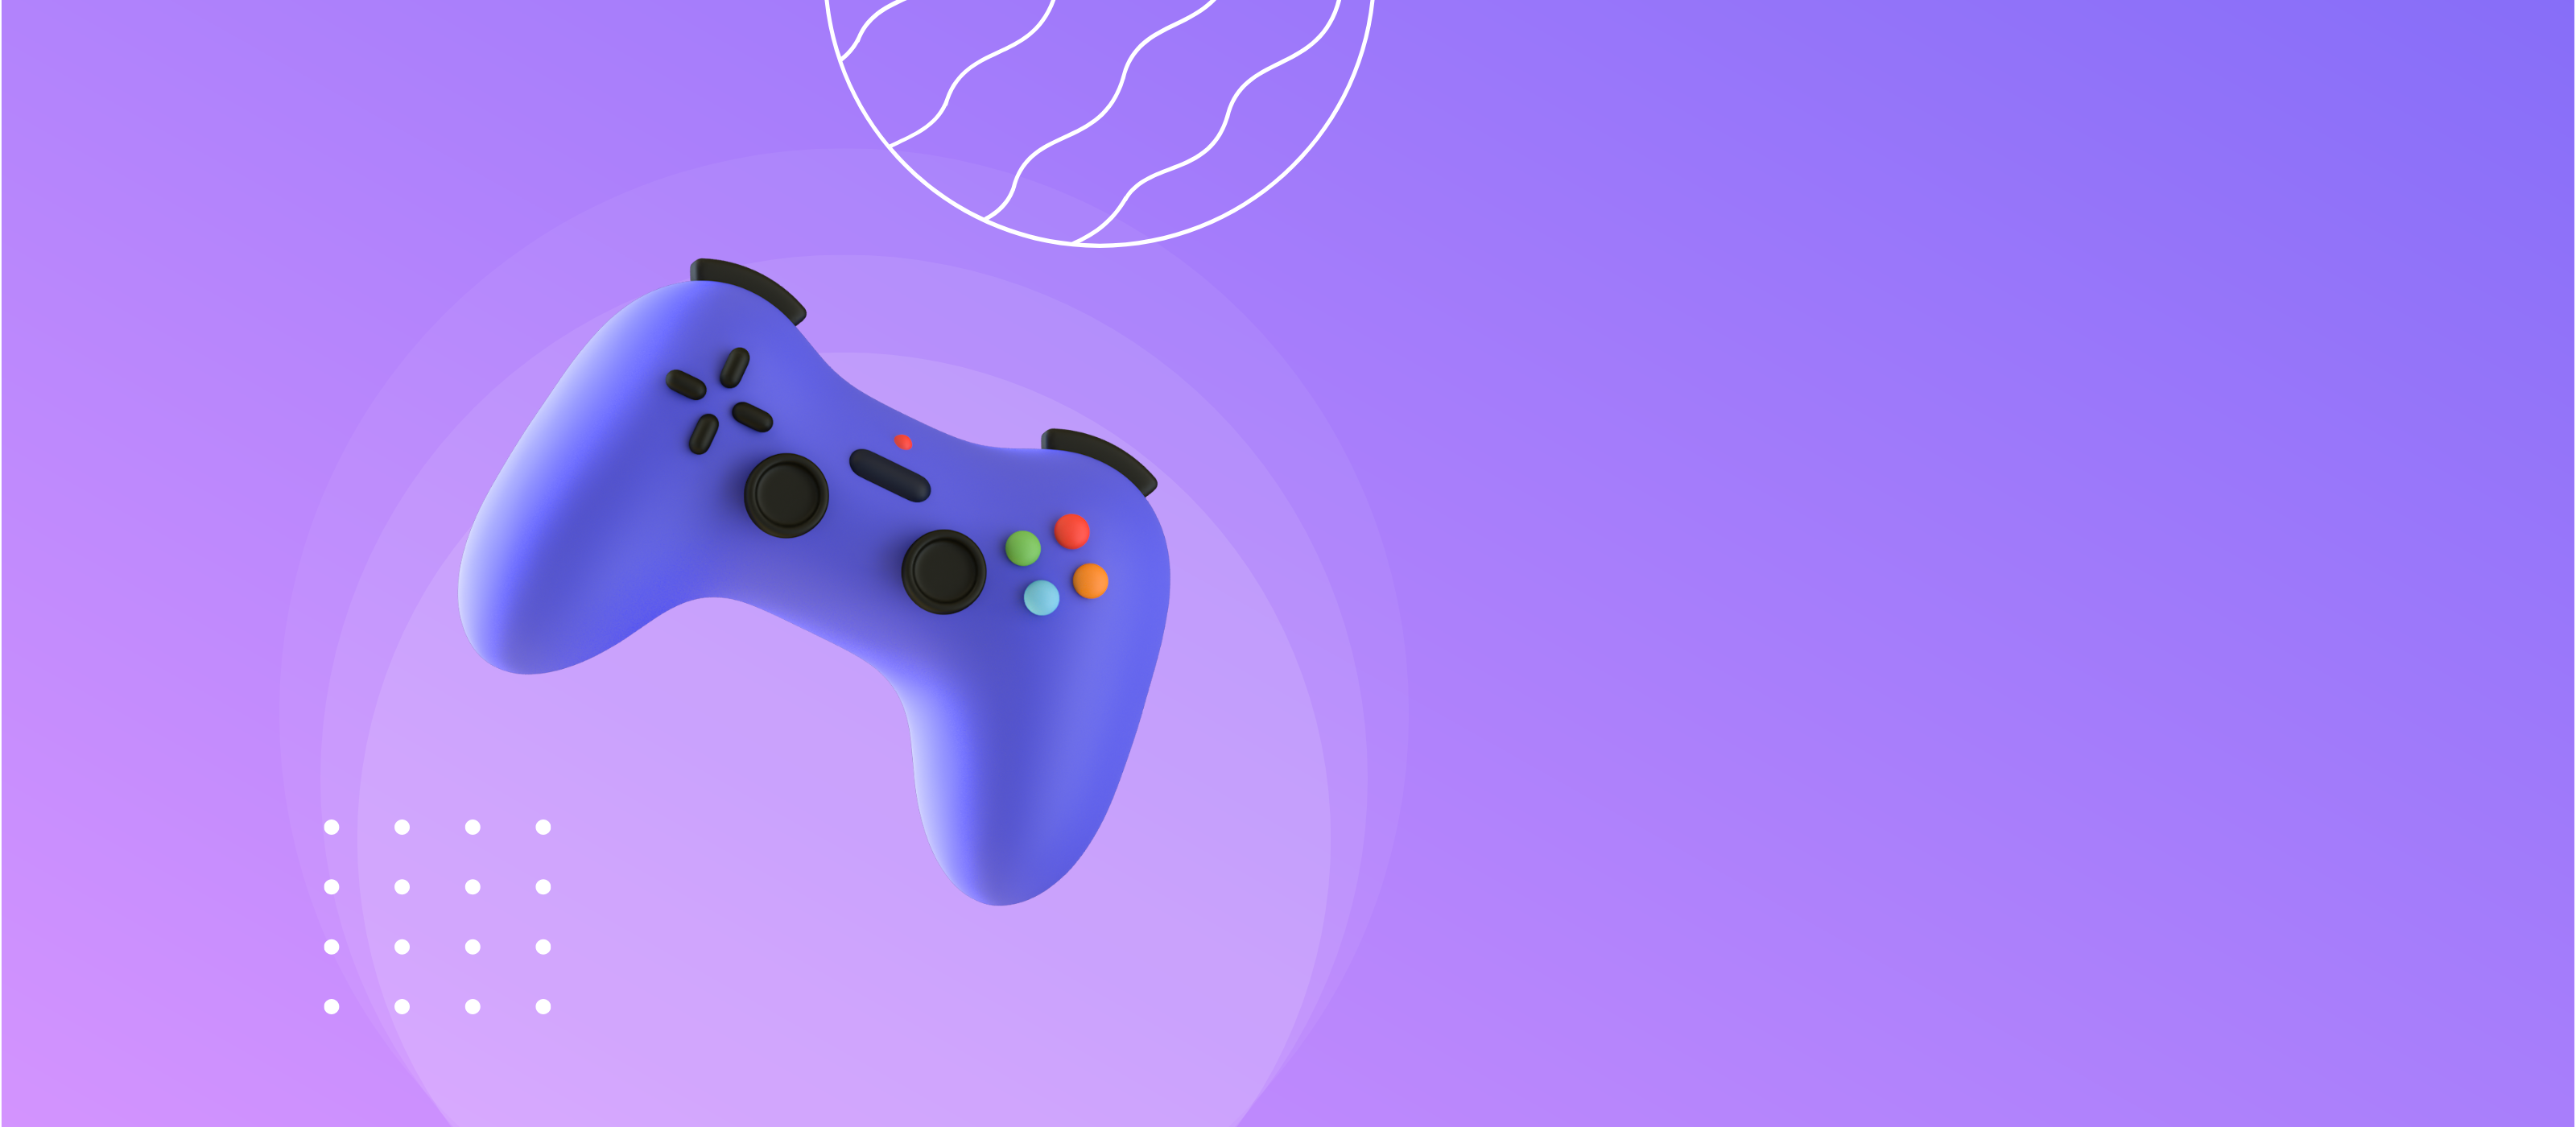 floating controller with purple background representing shopgalactica community